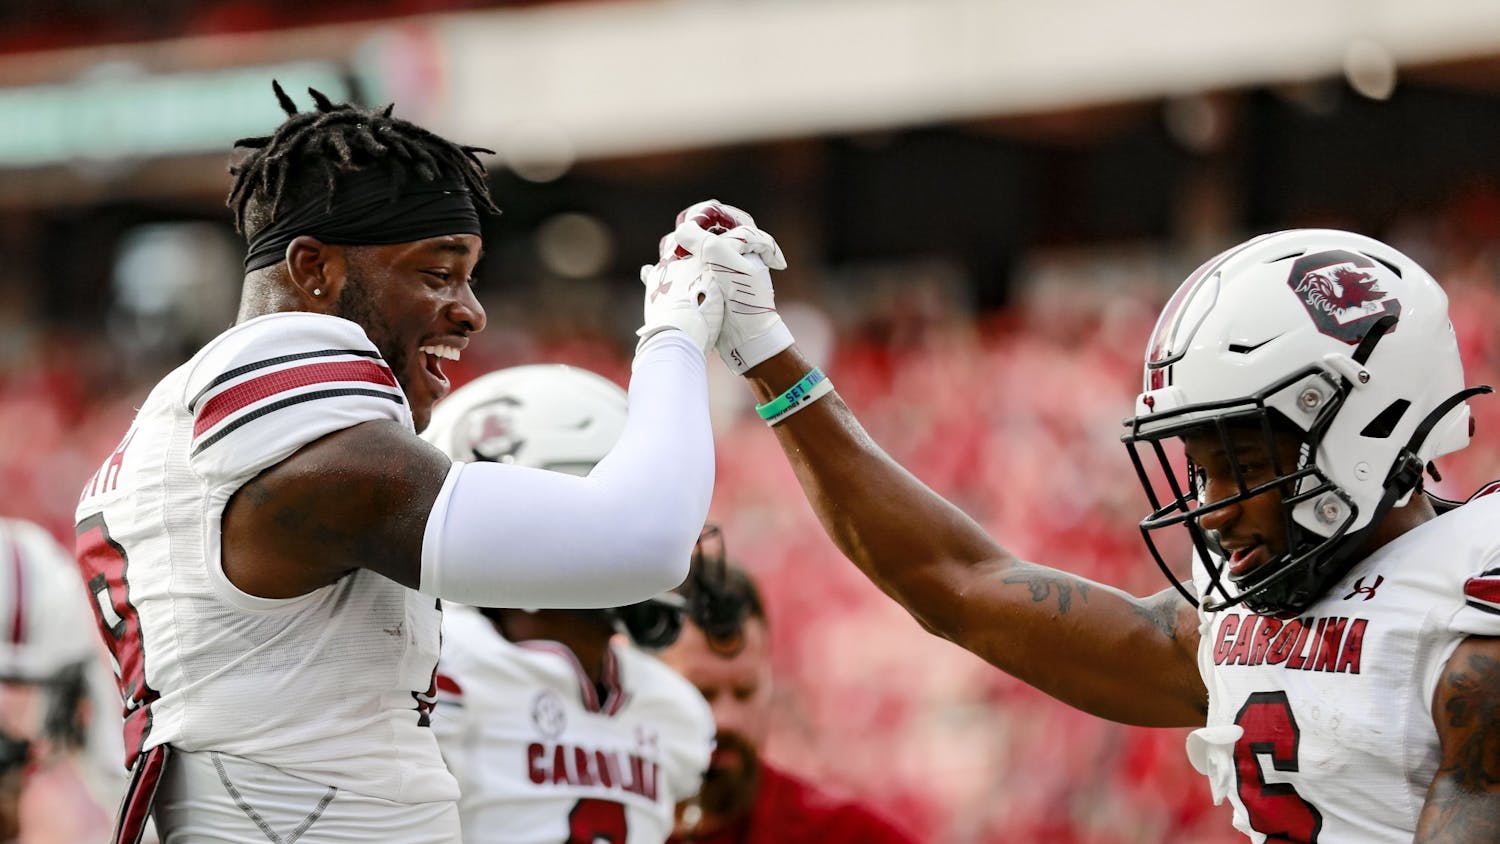 Redshirt sophomore defensive back Cam Smith and senior wide receiver Josh Vann have fun before South Carolina's game against Georgia on Sept. 18, 2021.